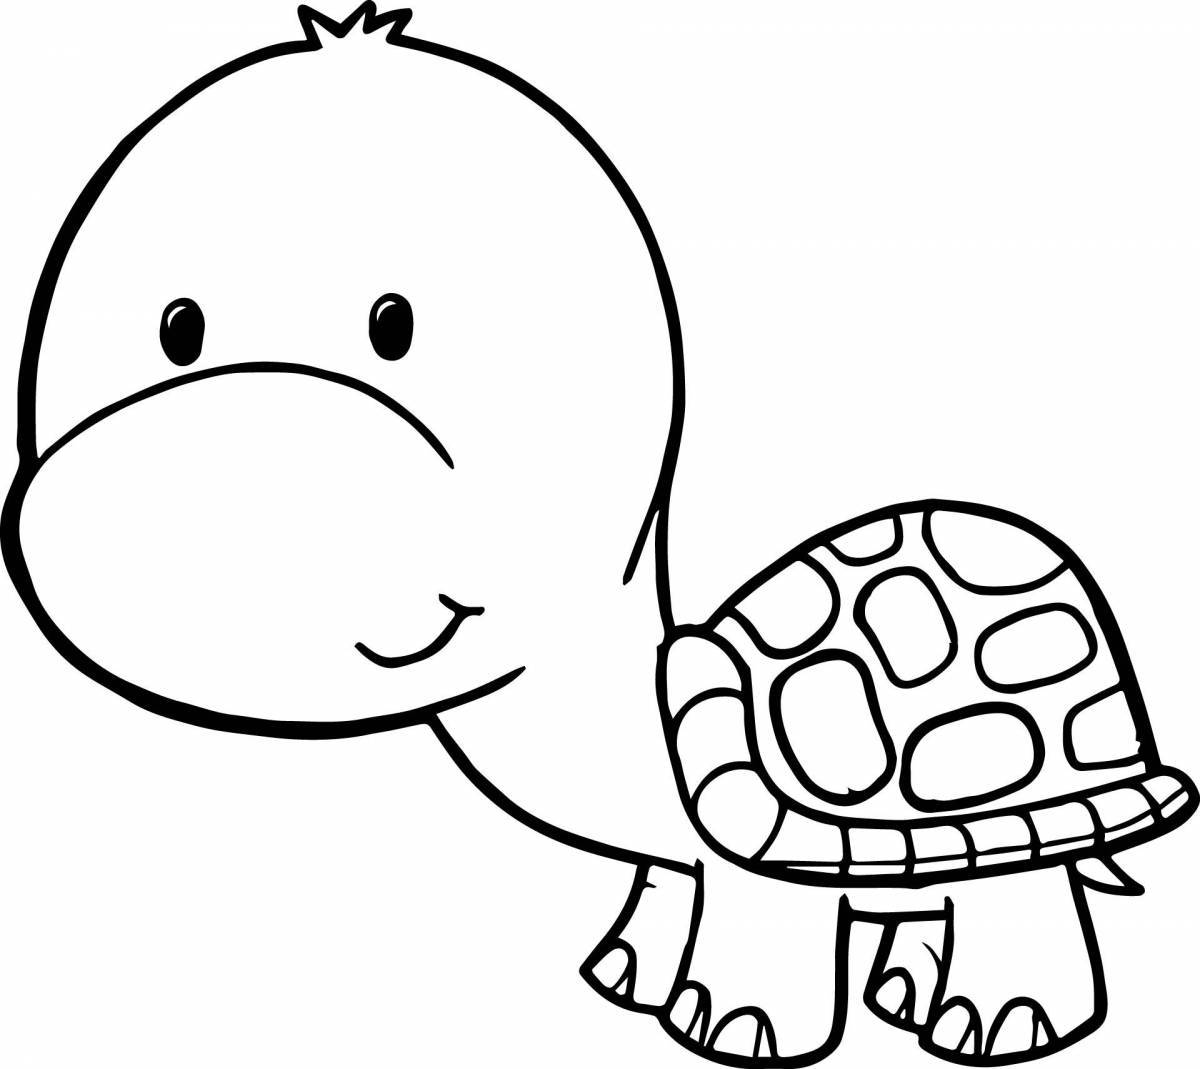 Adorable turtle coloring book